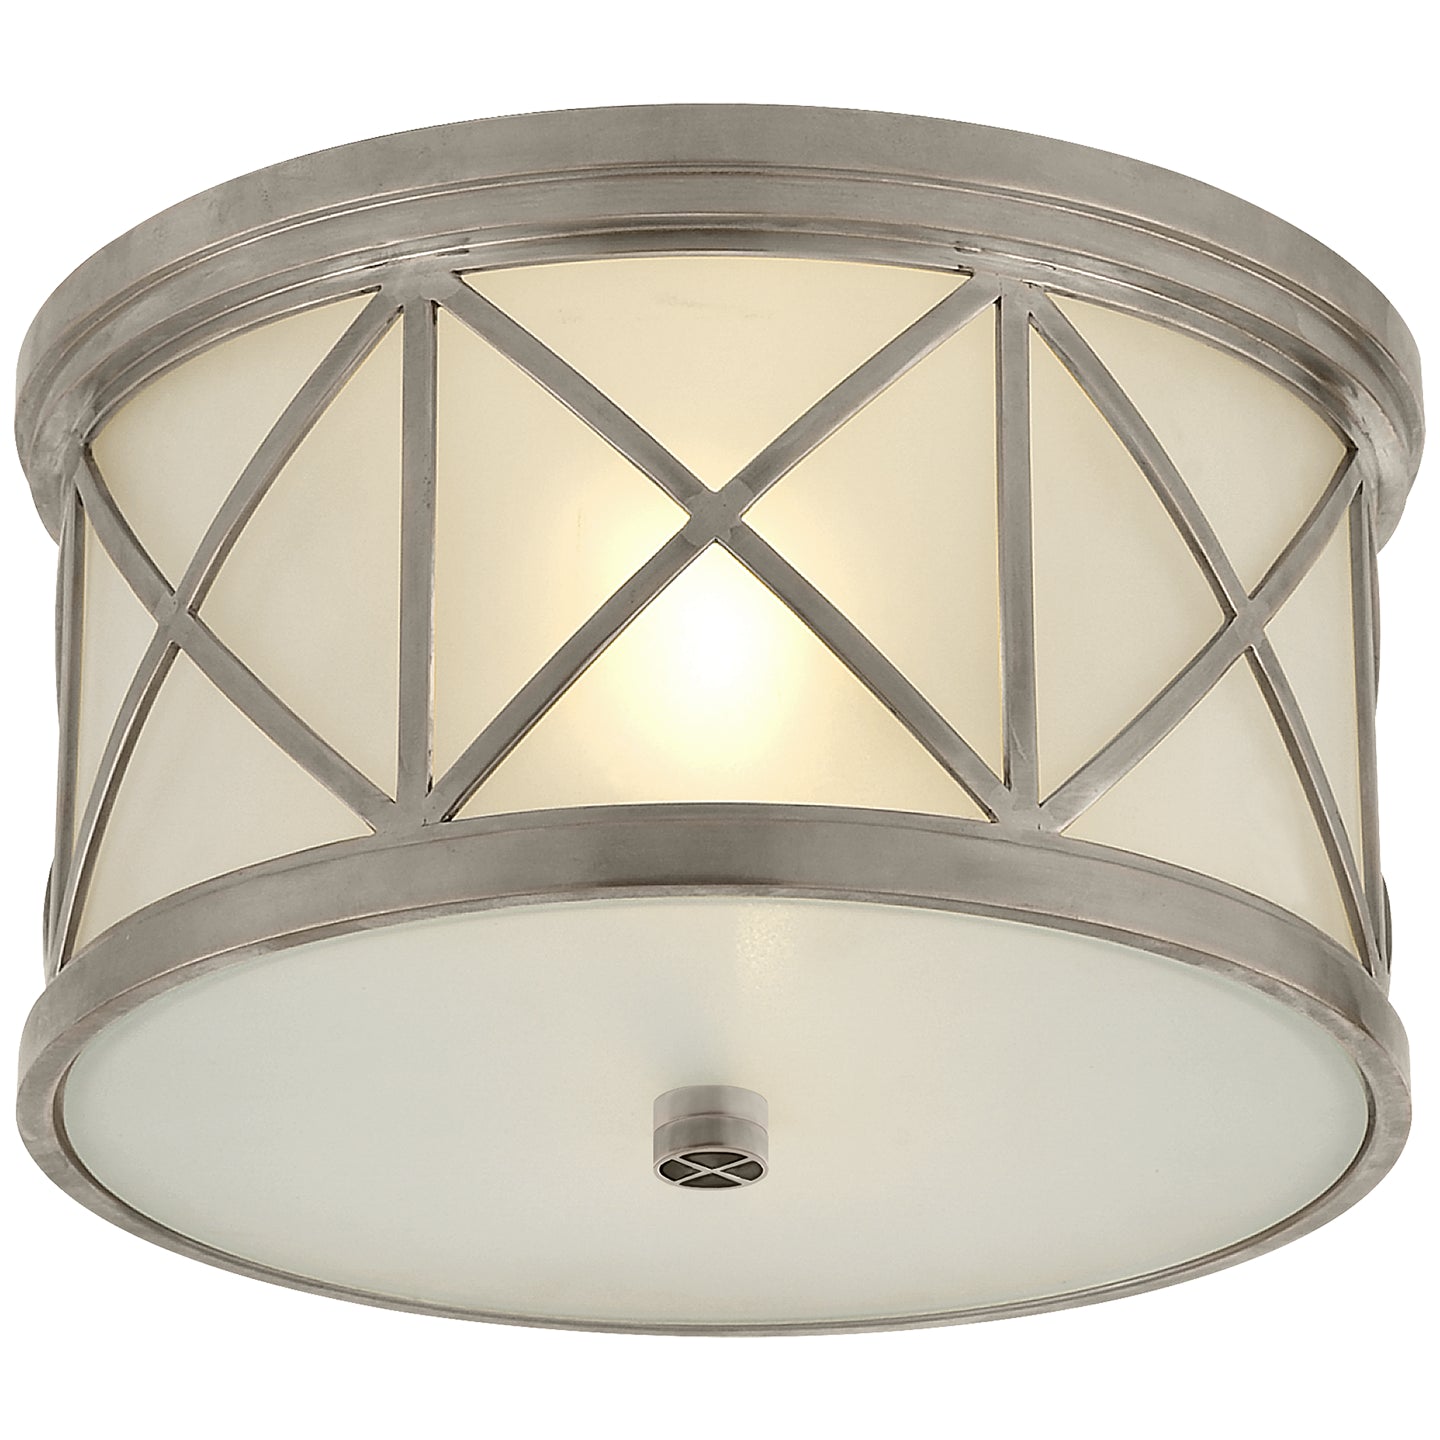 Load image into Gallery viewer, Visual Comfort Signature - SK 4010AN-FG - Two Light Flush Mount - Montpelier - Antique Nickel
